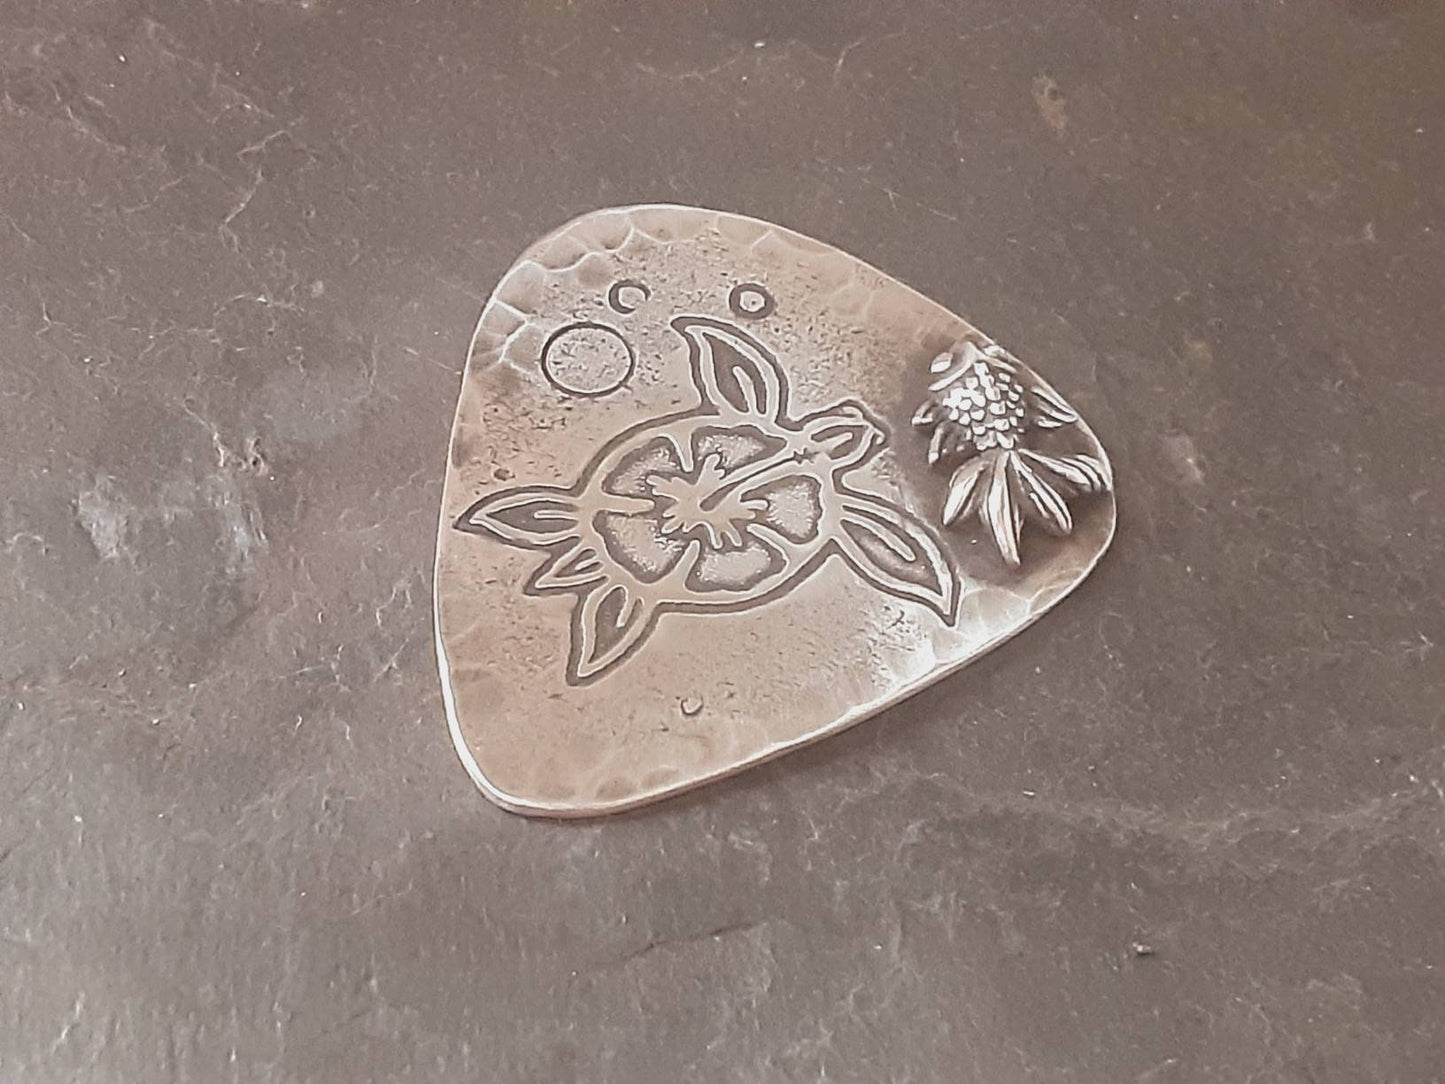 Tortoise and 3D Fish soldered on a sterling silver guitar pick